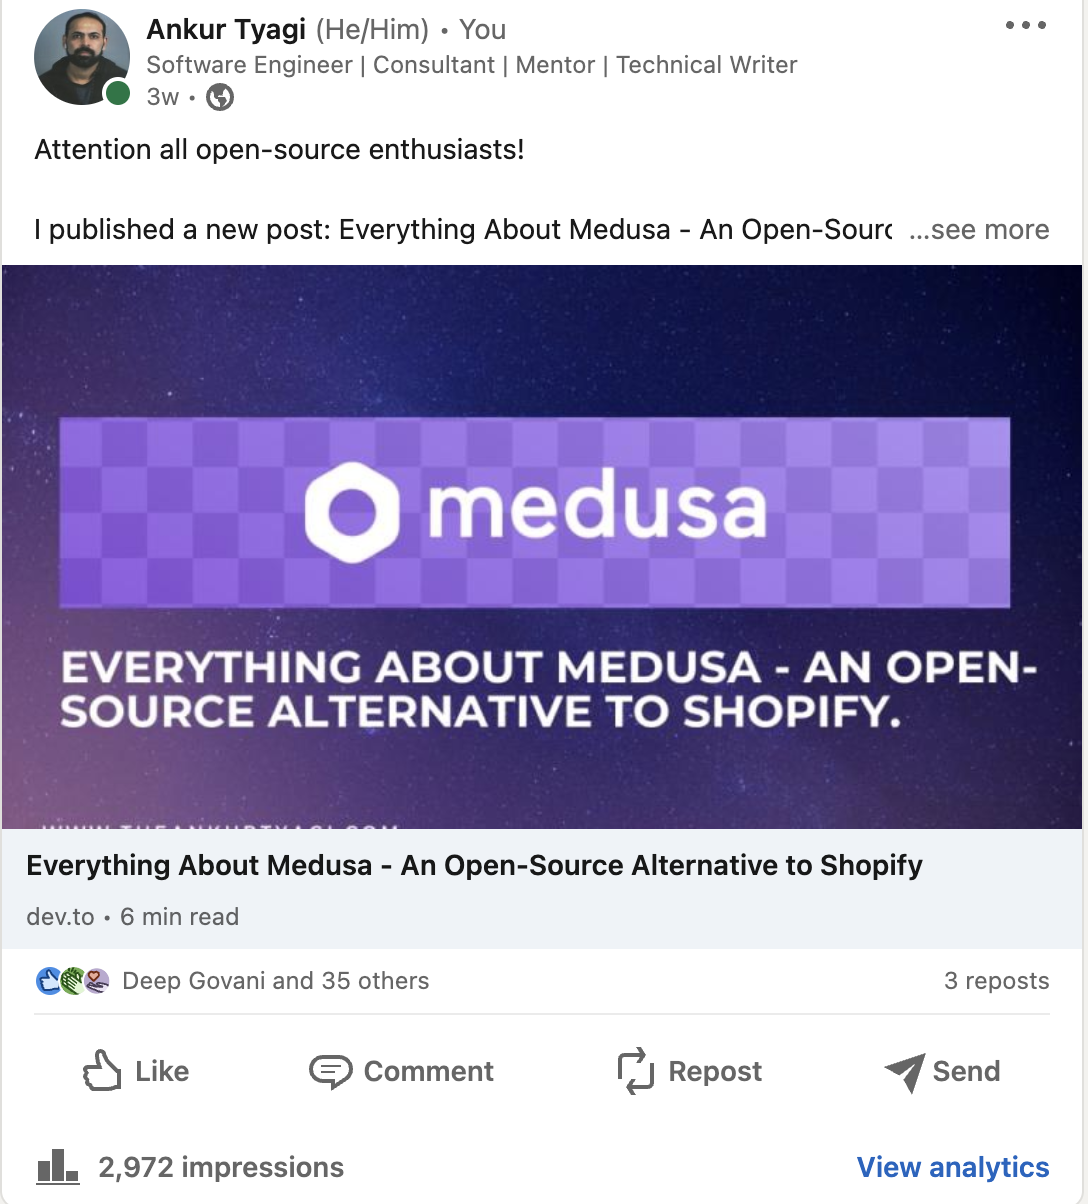 Everything About Medusa – An Open-Source Alternative to Shopify
